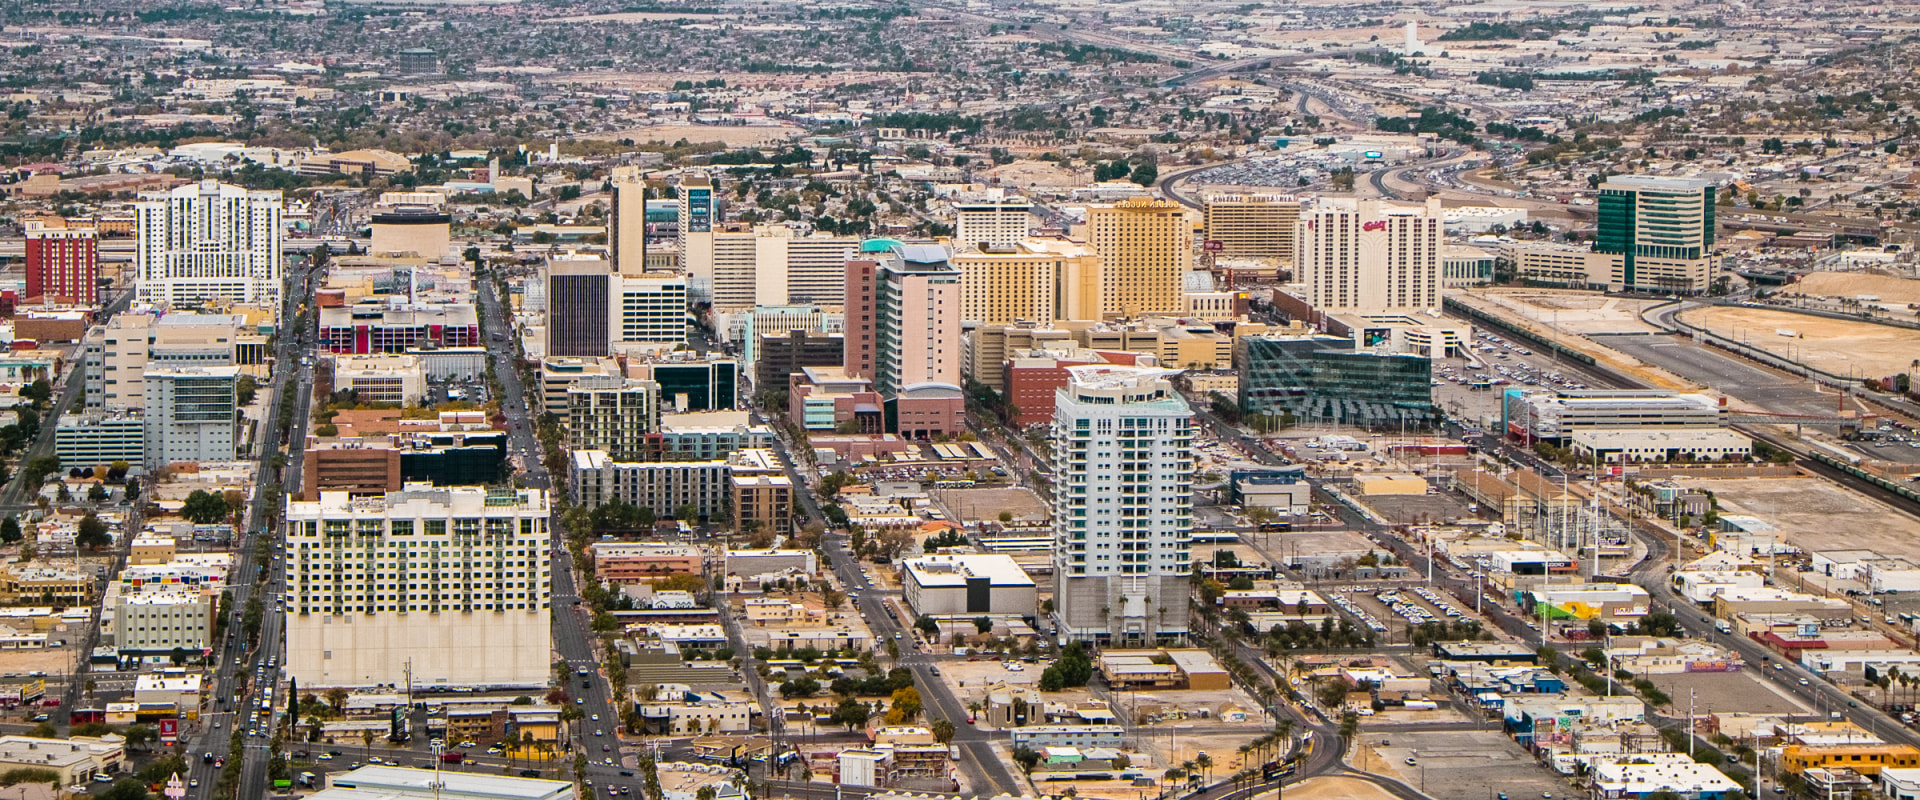 Insurance Services for Projects in Las Vegas, Nevada: Finding the Right Resources